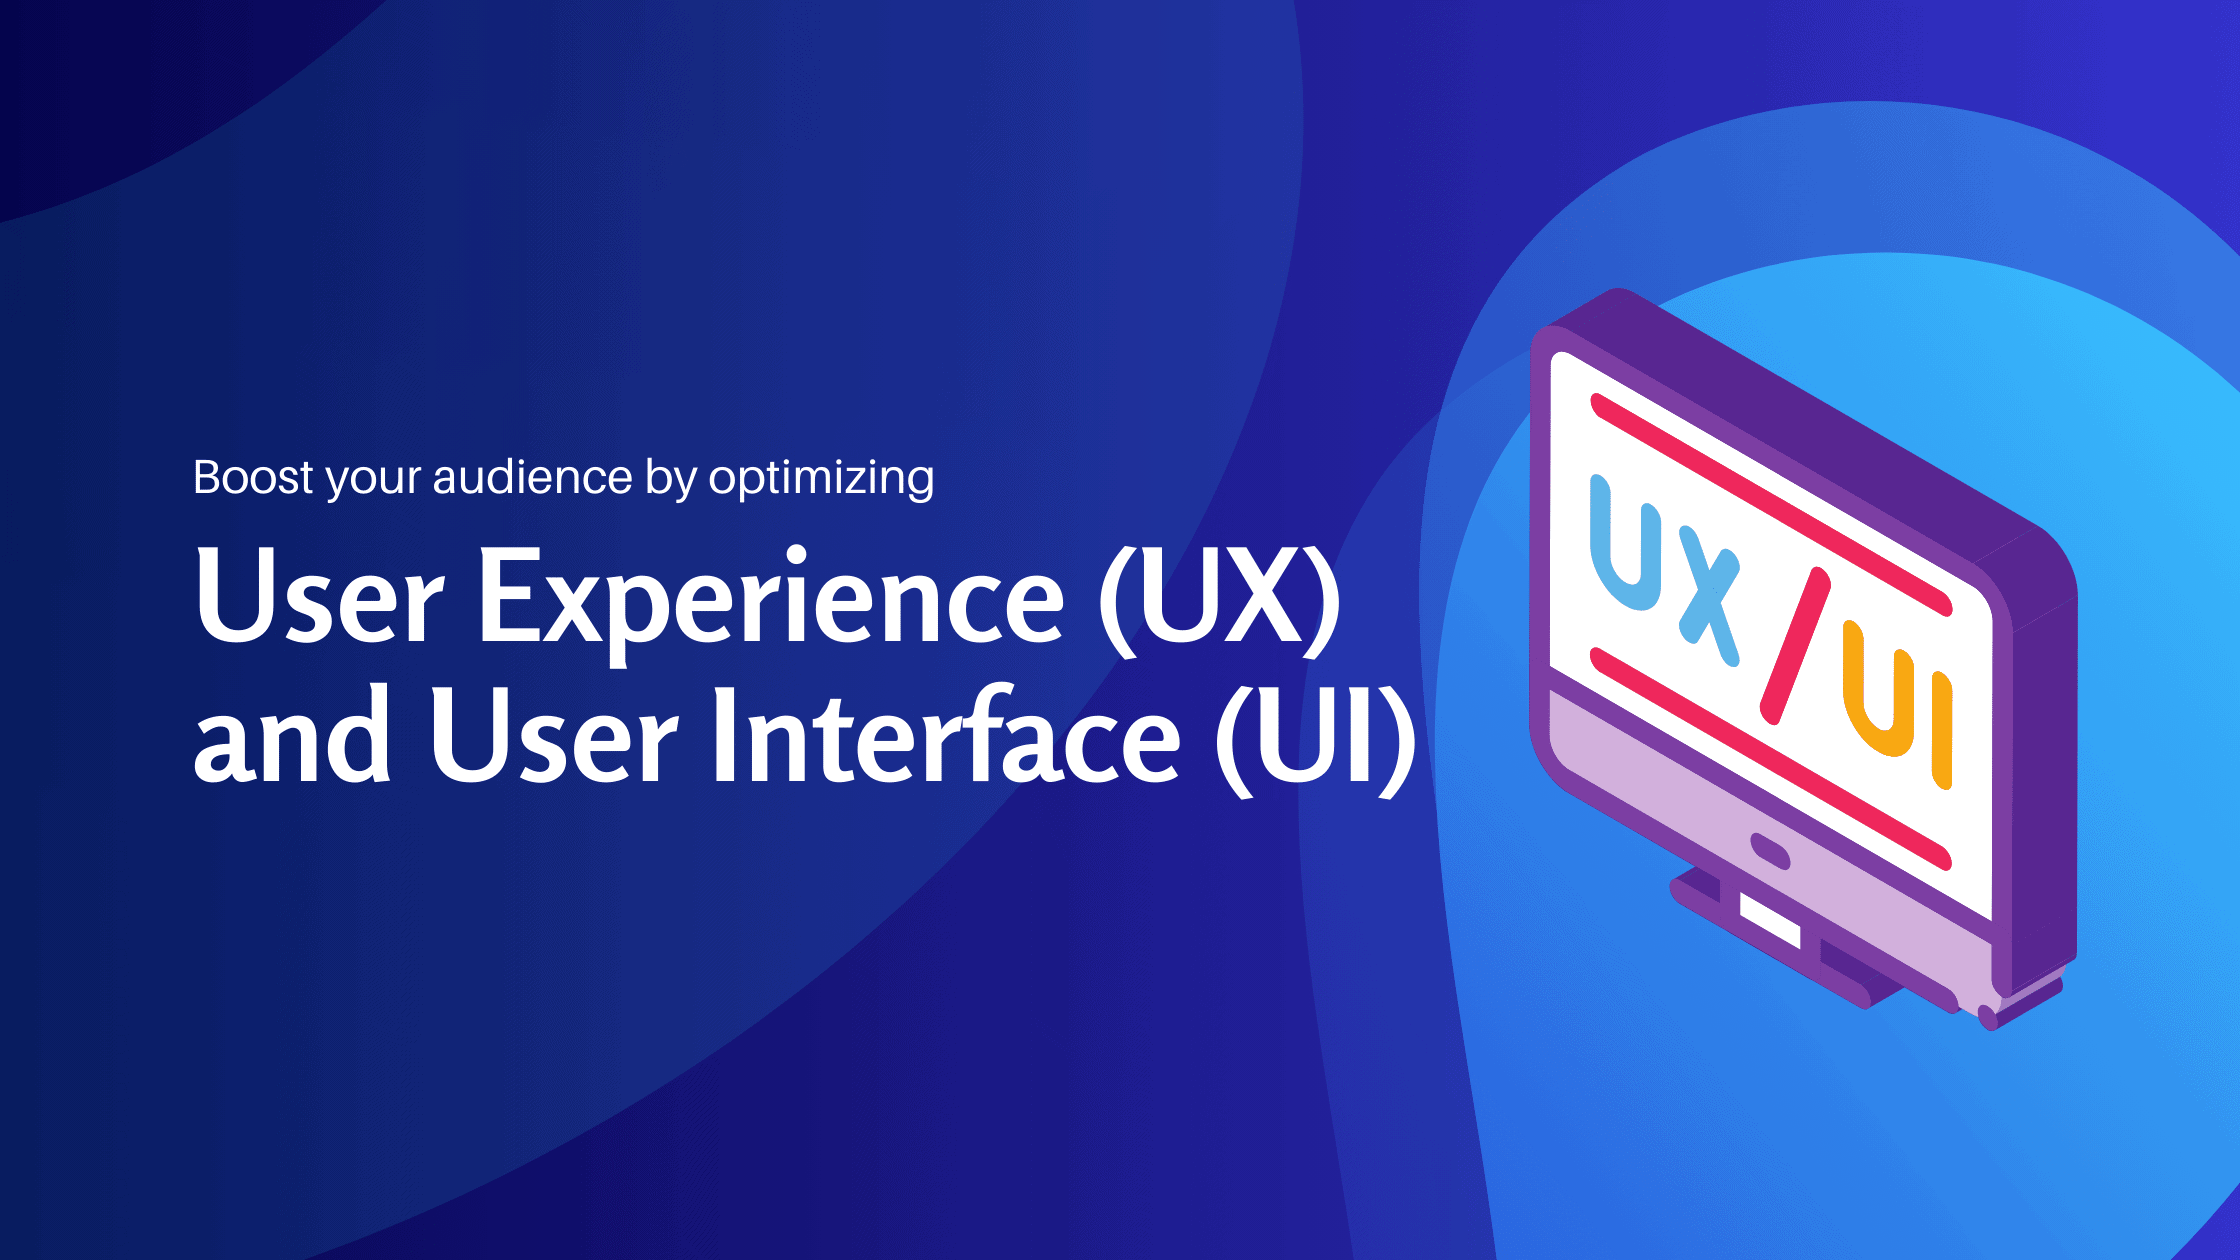 Boost your audience by optimizing User Experience (UX) and User Interface (UI) - Konectiz